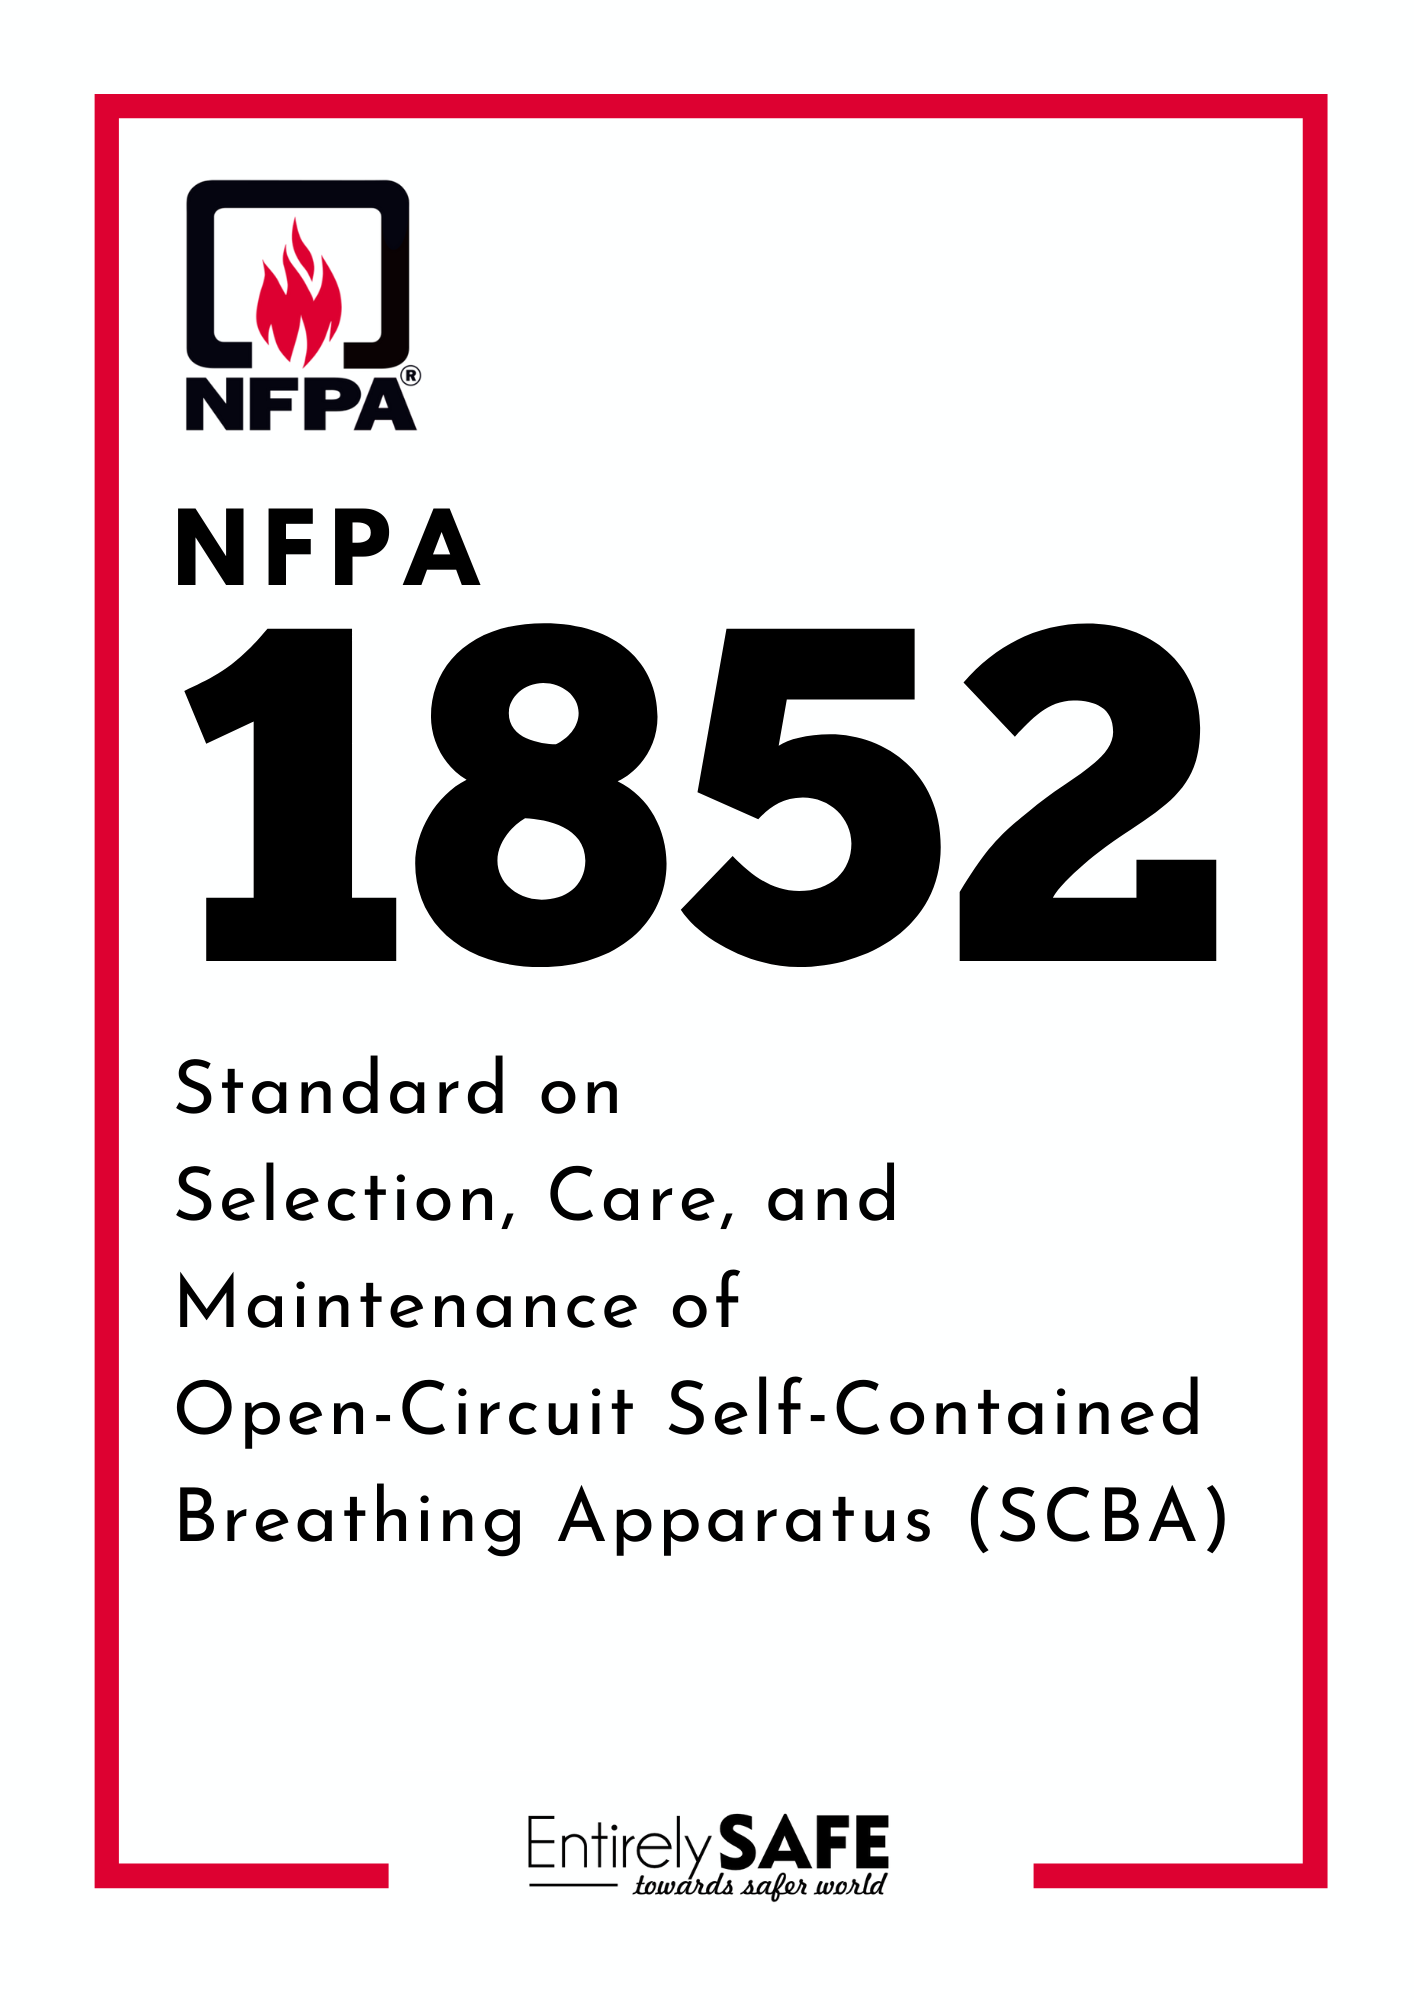 264-NFPA-1852-Standard-on-Selection-Care-and-Maintenance-of-Open-Circuit-Self-Contained-Breathing-Apparatus-(SCBA)